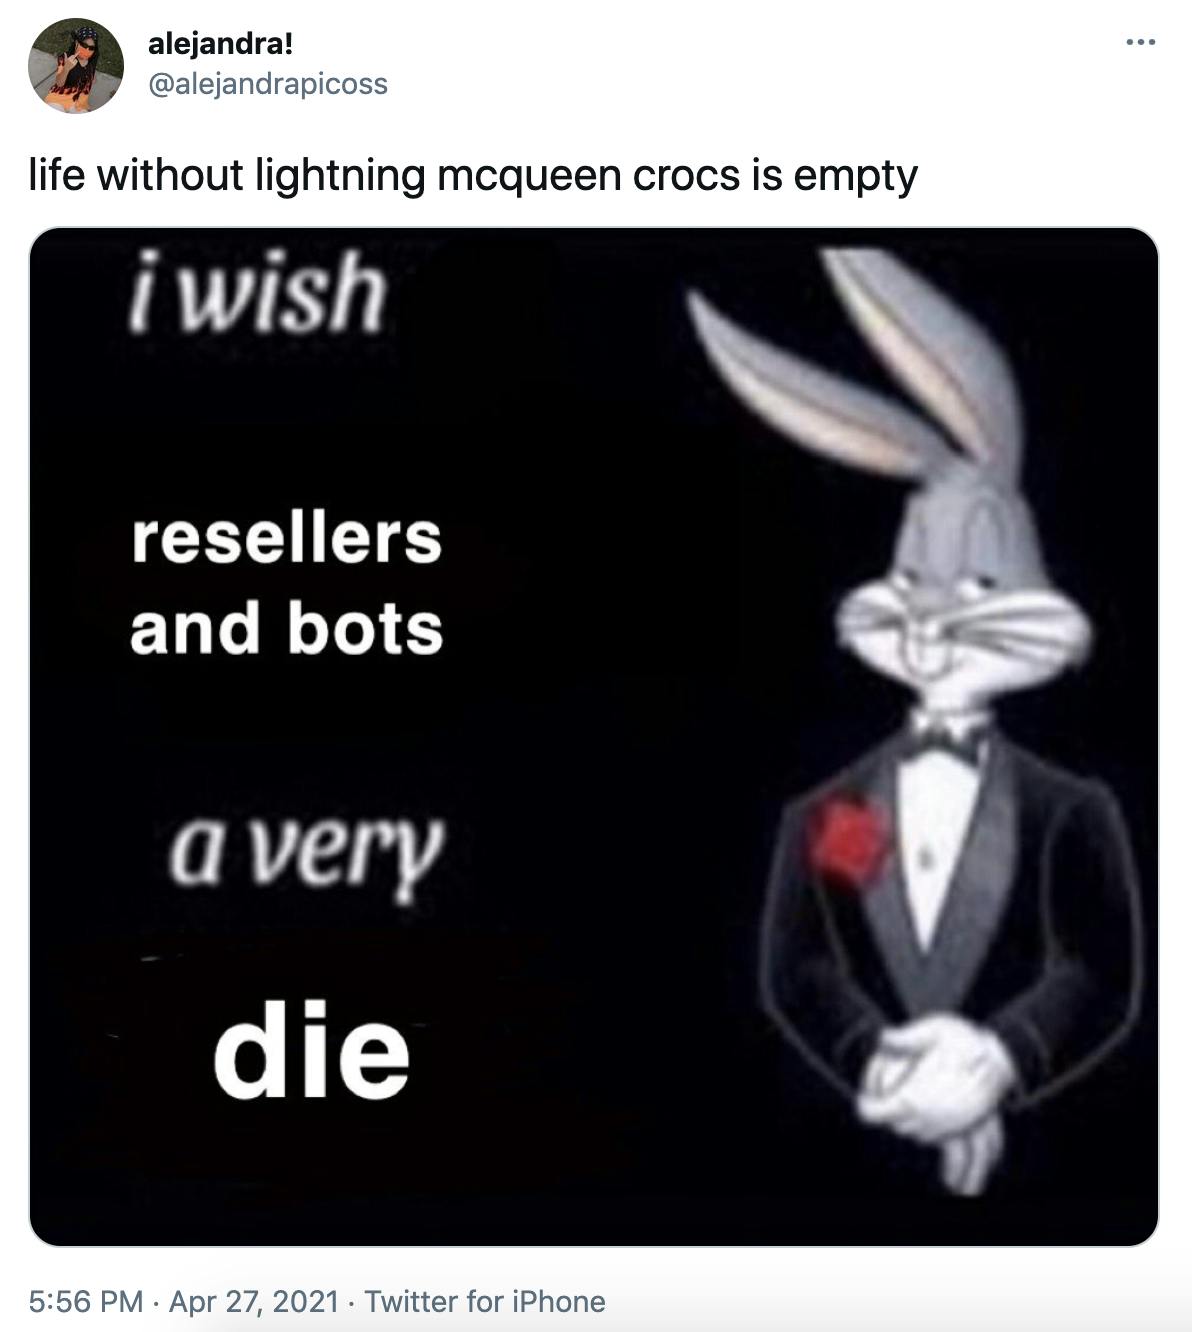 'life without lightning mcqueen crocs is empty' the bugs bunny in black tie mean with the text 'I wish resellers and bots a very die'